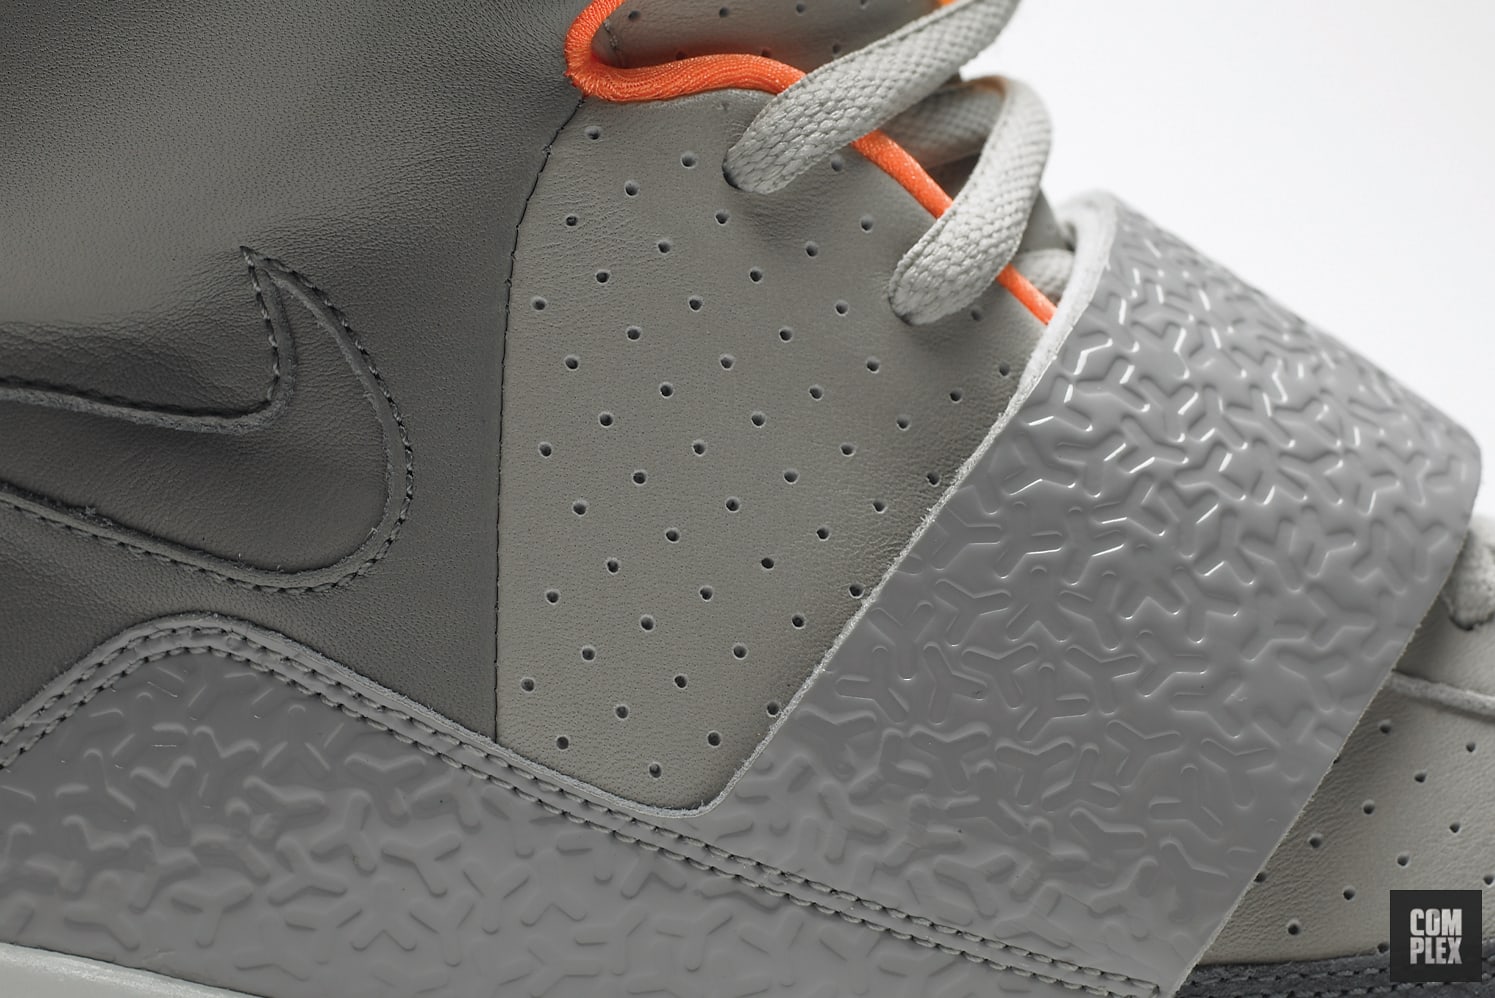 apotheker Dochter Oranje Air Yeezy Has Arrived: A Kanye West and Nike Collaboration | Complex